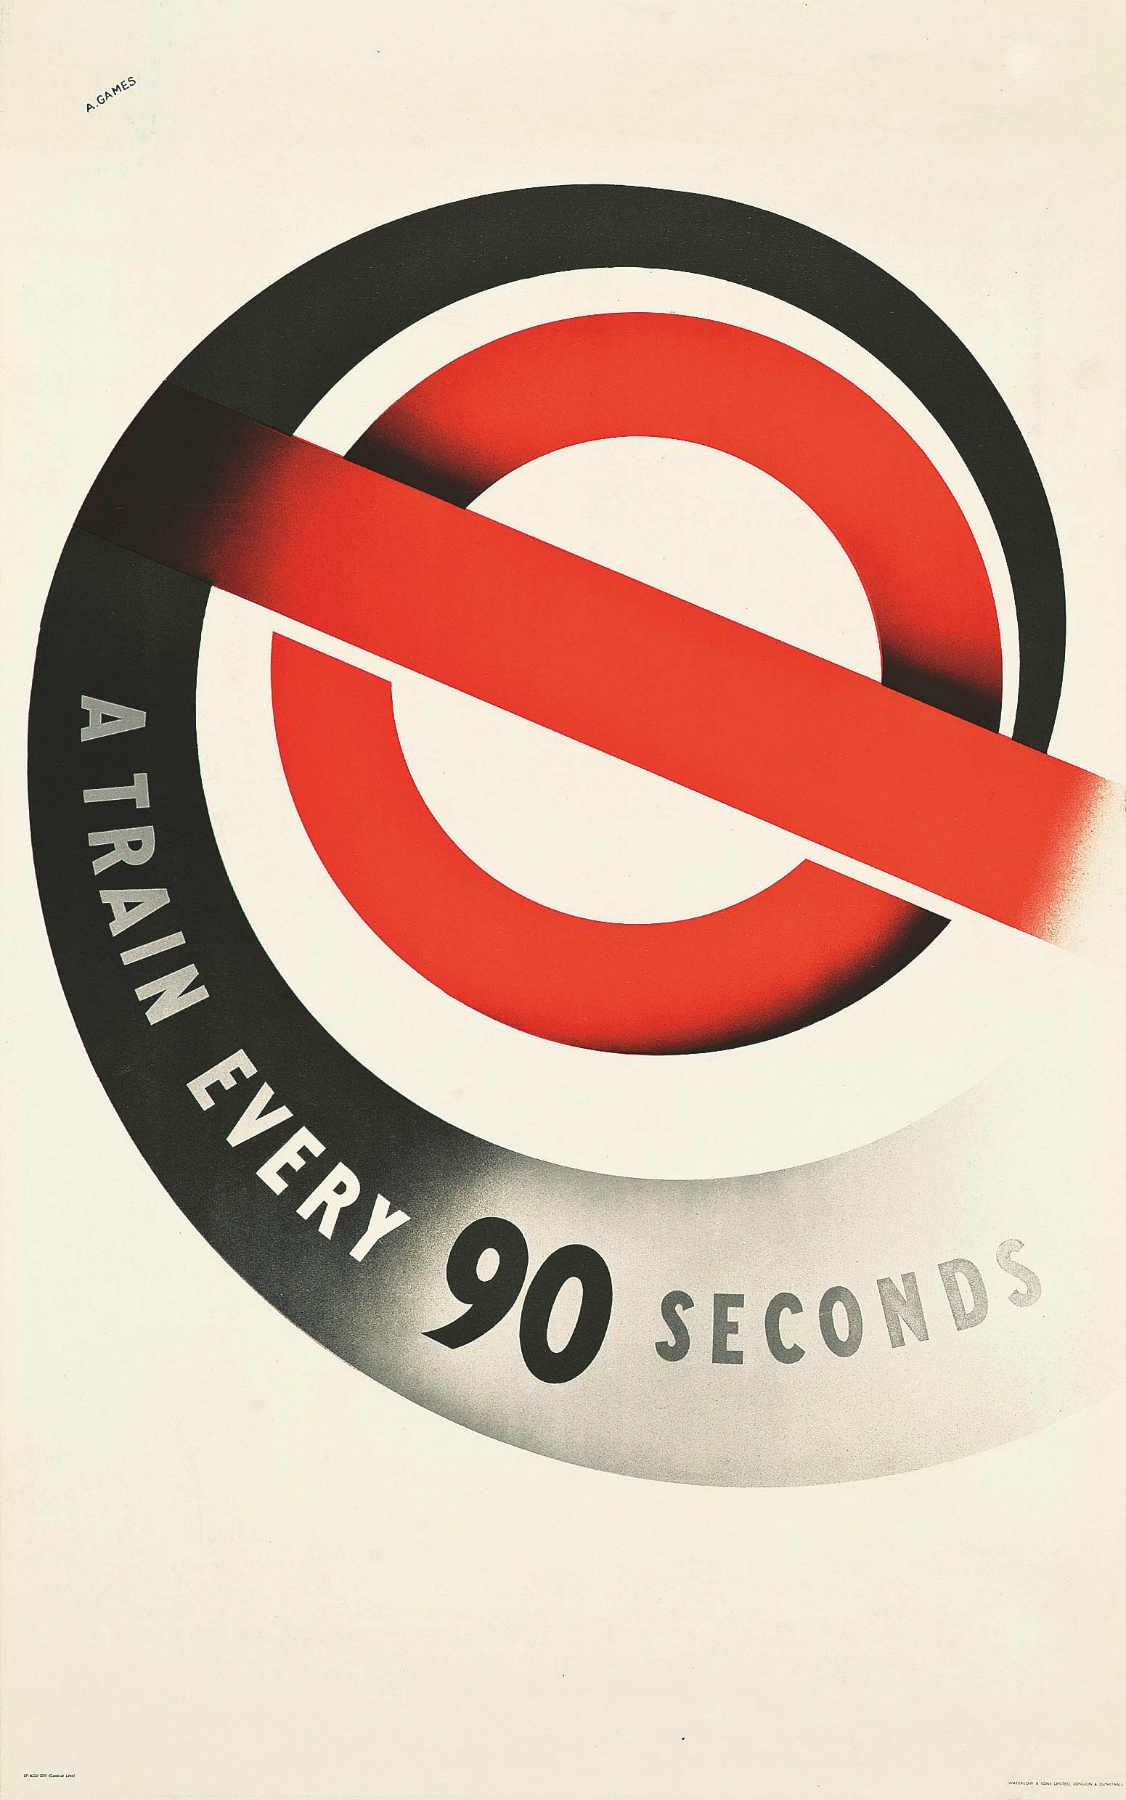 Train every 90 seconds. UK, 1937 - Great Britain, London, Metro, A train, Time, Poster, Advertising